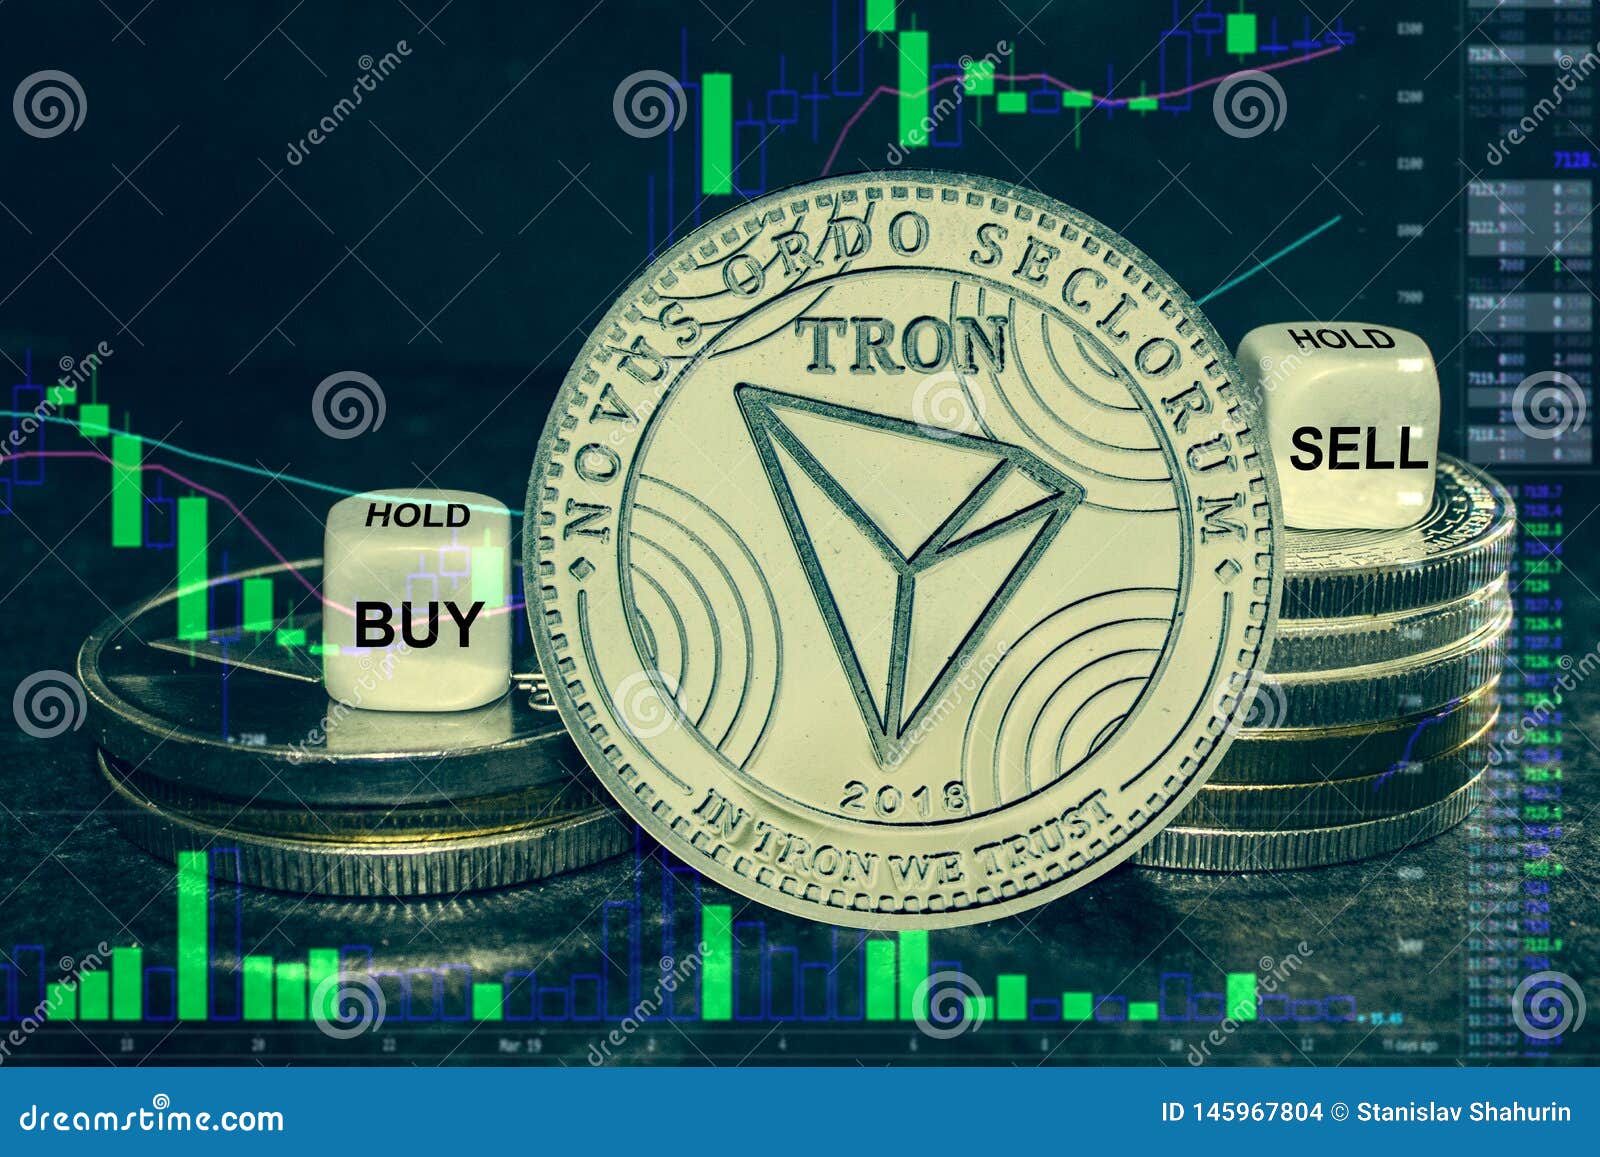 How to Buy TRON (TRX) Step-by-Step Guide - Pionex